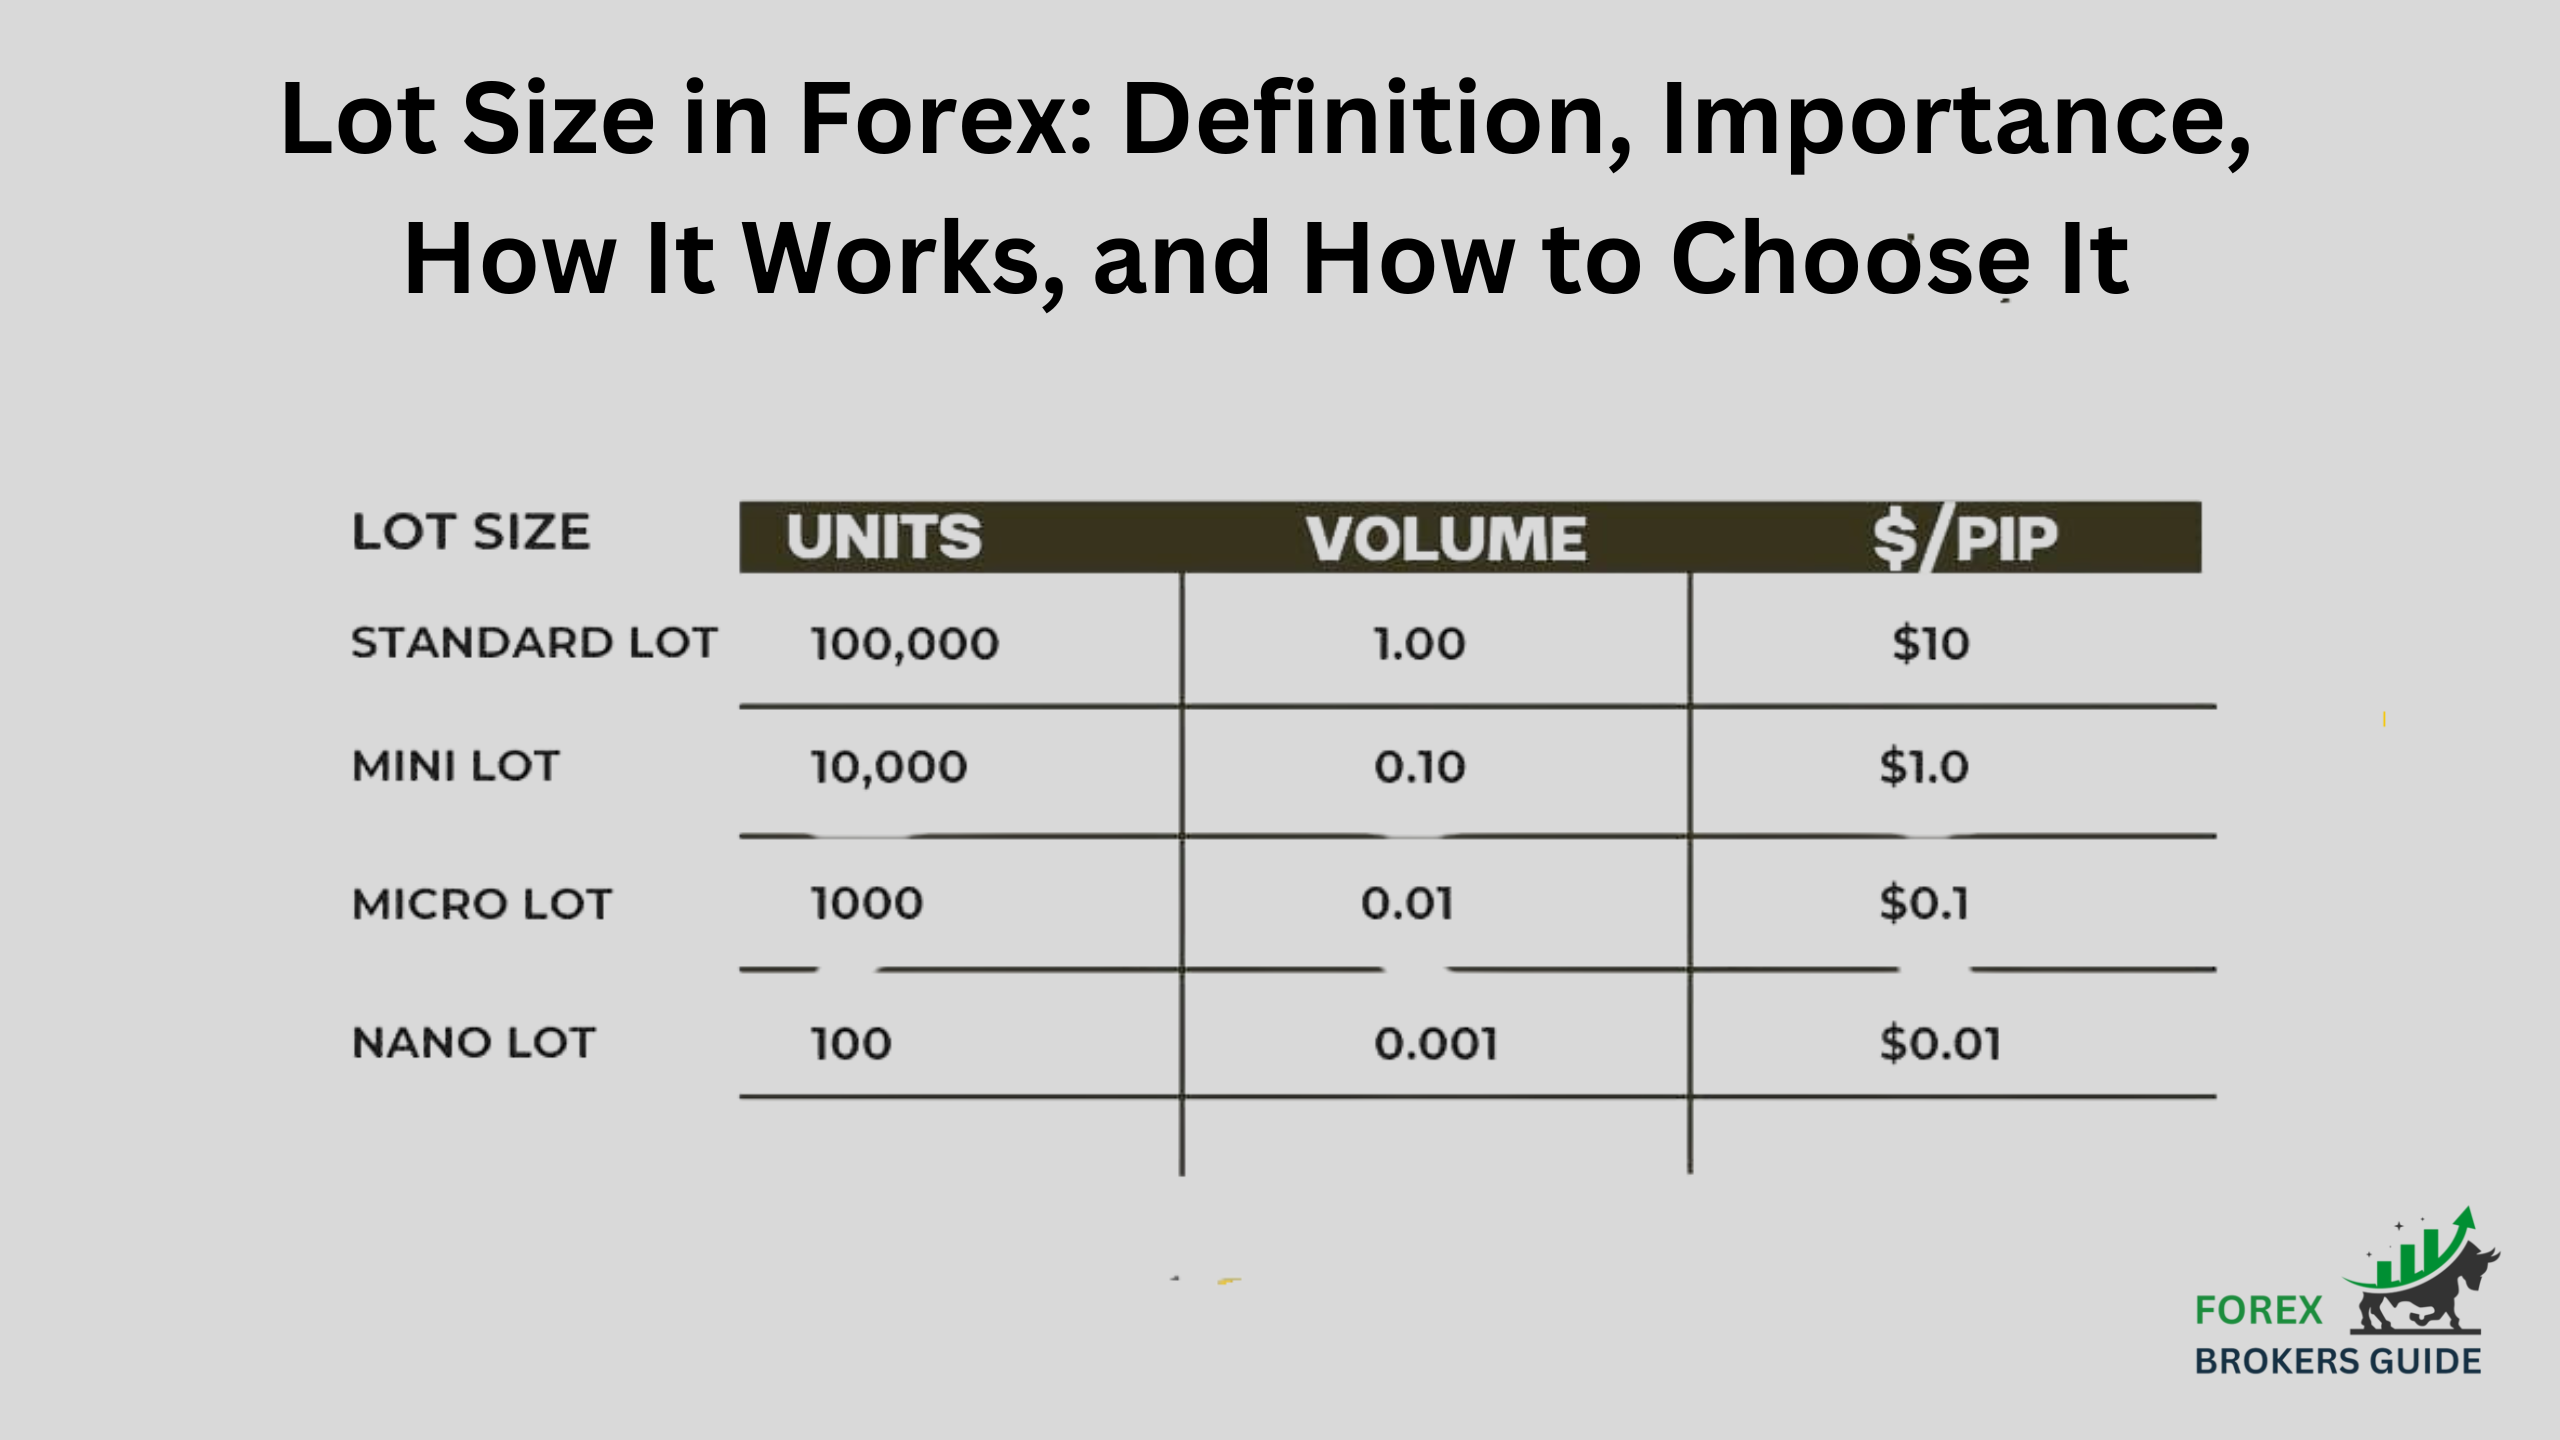 Lot Size in Forex Definition, Importance, How It Works, and How to Choose It